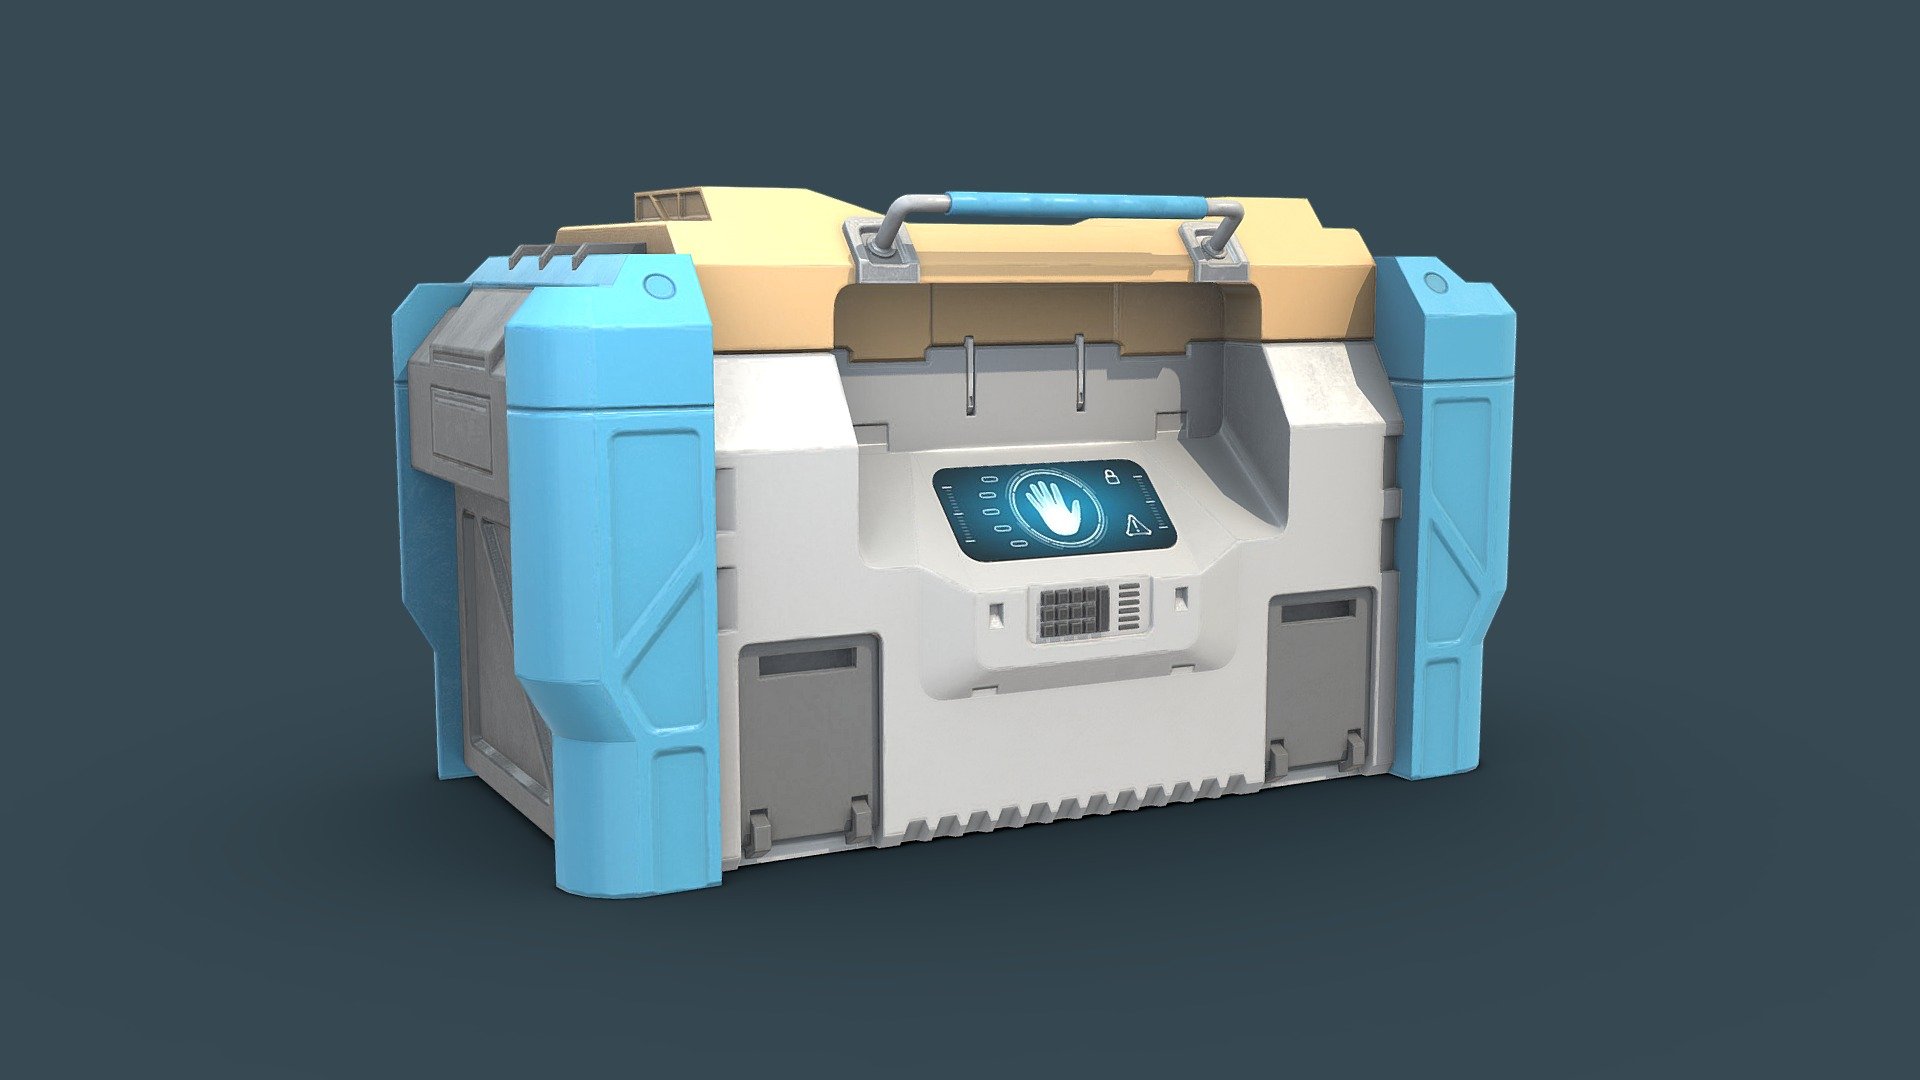 Based on concept art from Adam Taylor: Concept Art

3D model created in 3Ds Max, texturing in 3D Coat/Photoshop/Illustrator

I will be grateful for your feedback, don't forget to like it &#128151; - Sci-Fi Secure Container - 3D model by Oleksandr Bykov (@oleksandr.bykov) 3d model